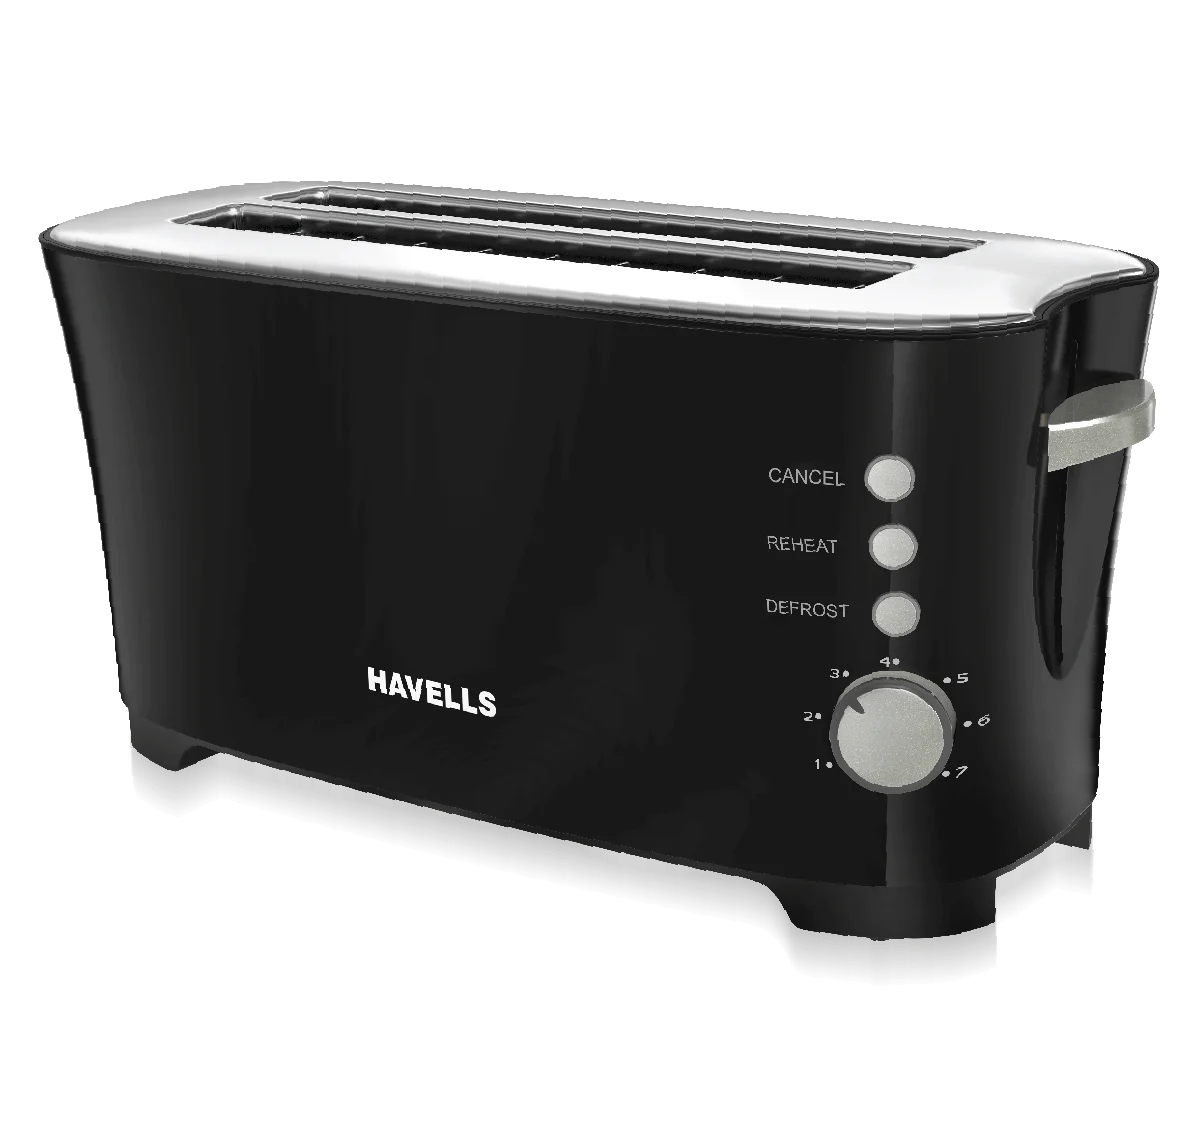 Havells Pop Up Toaster Appliaces Coimbatore